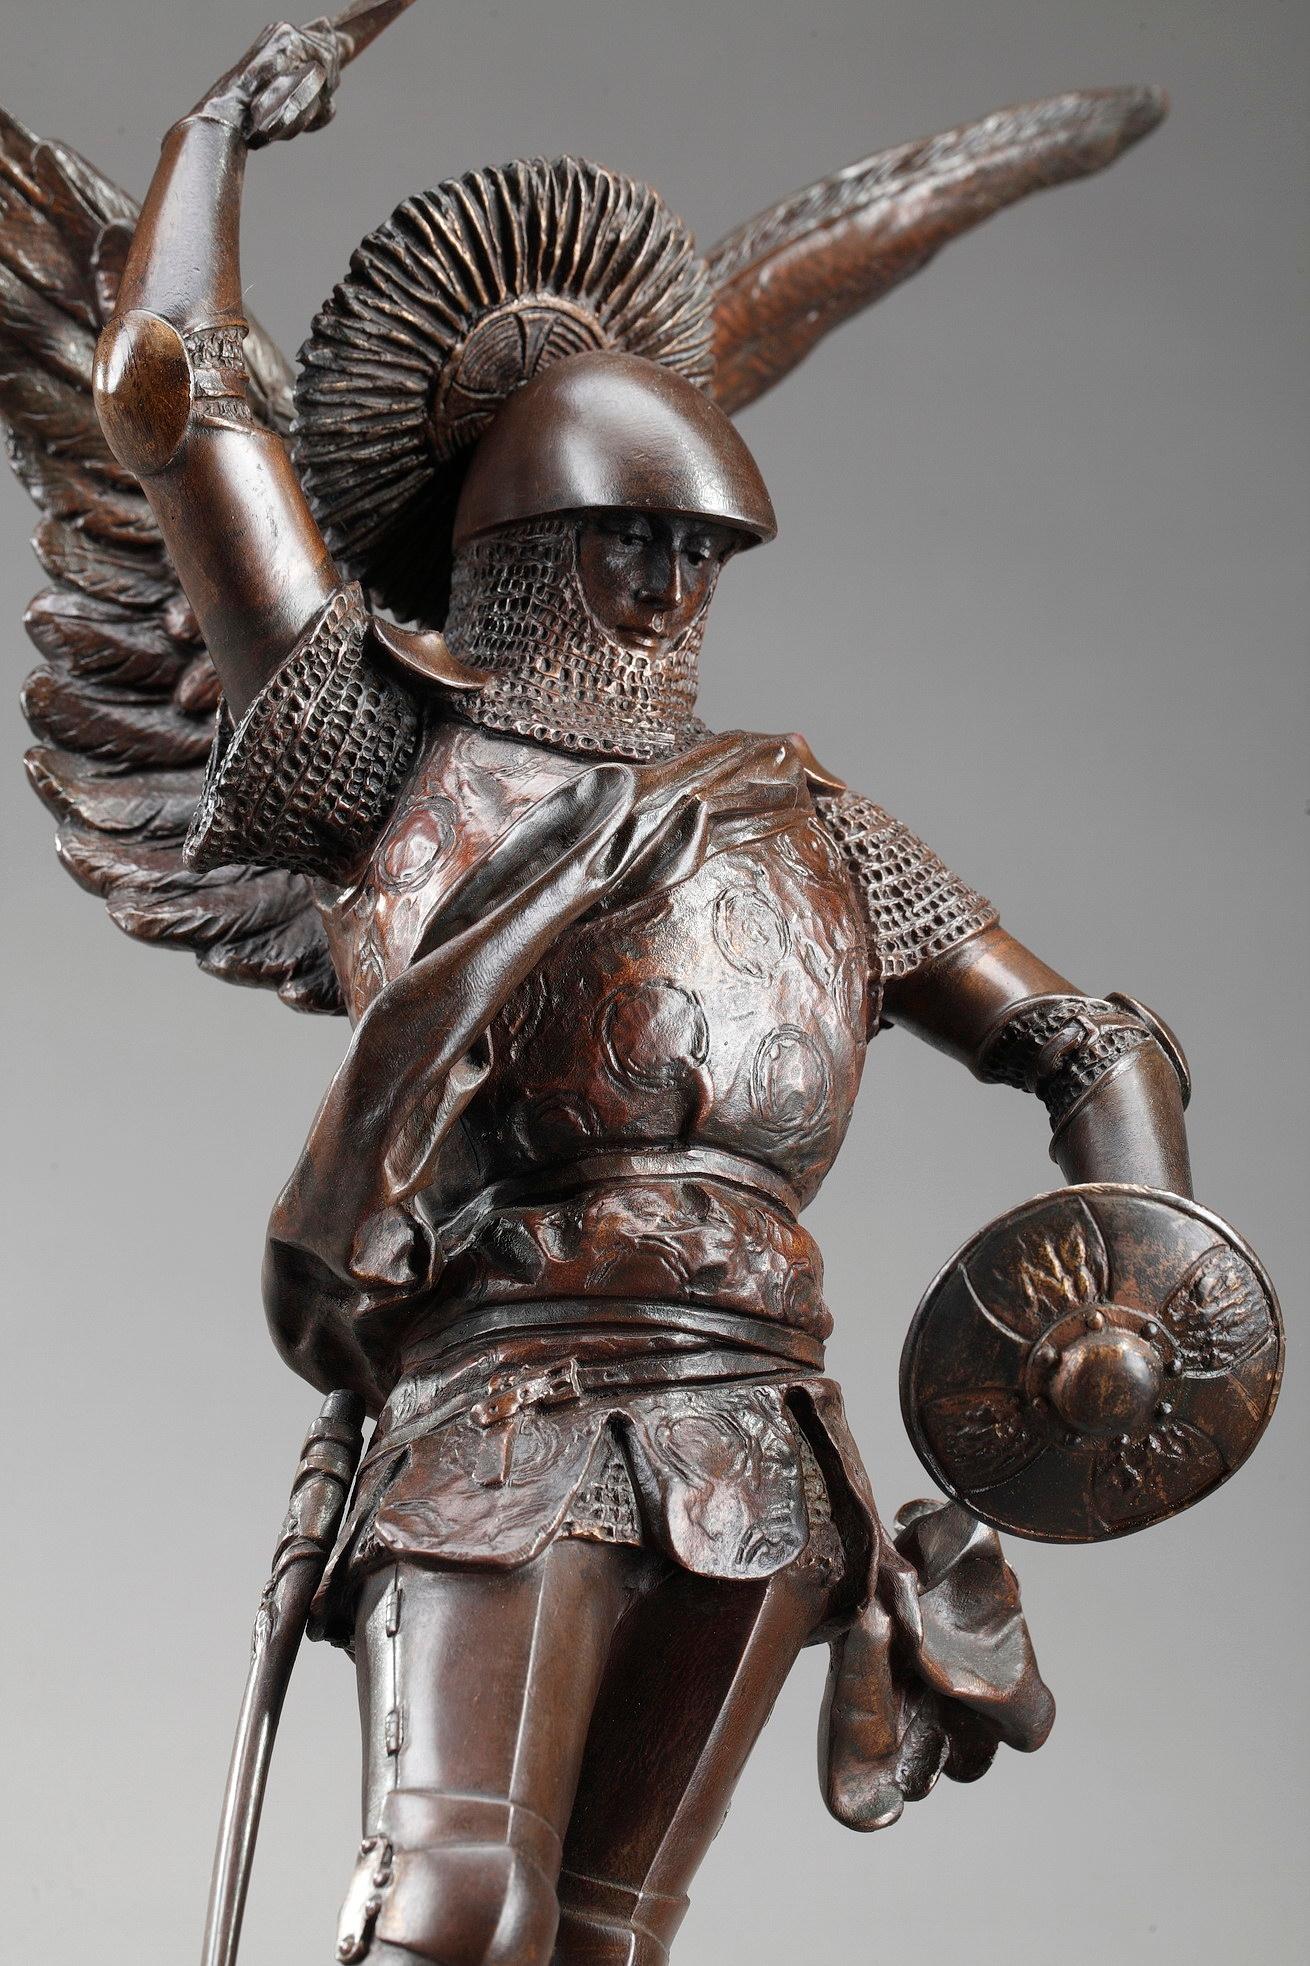 Bronze sculpture with brown patina featuring Saint-Michel terrassant le dragon [St Michael Slaying the Dragon] by Emmanuel Fremiet (French, 1824-1910). In 1894, Emmanuel Fremiet was chosen to design the statue to crown the abbey of Mont Saint